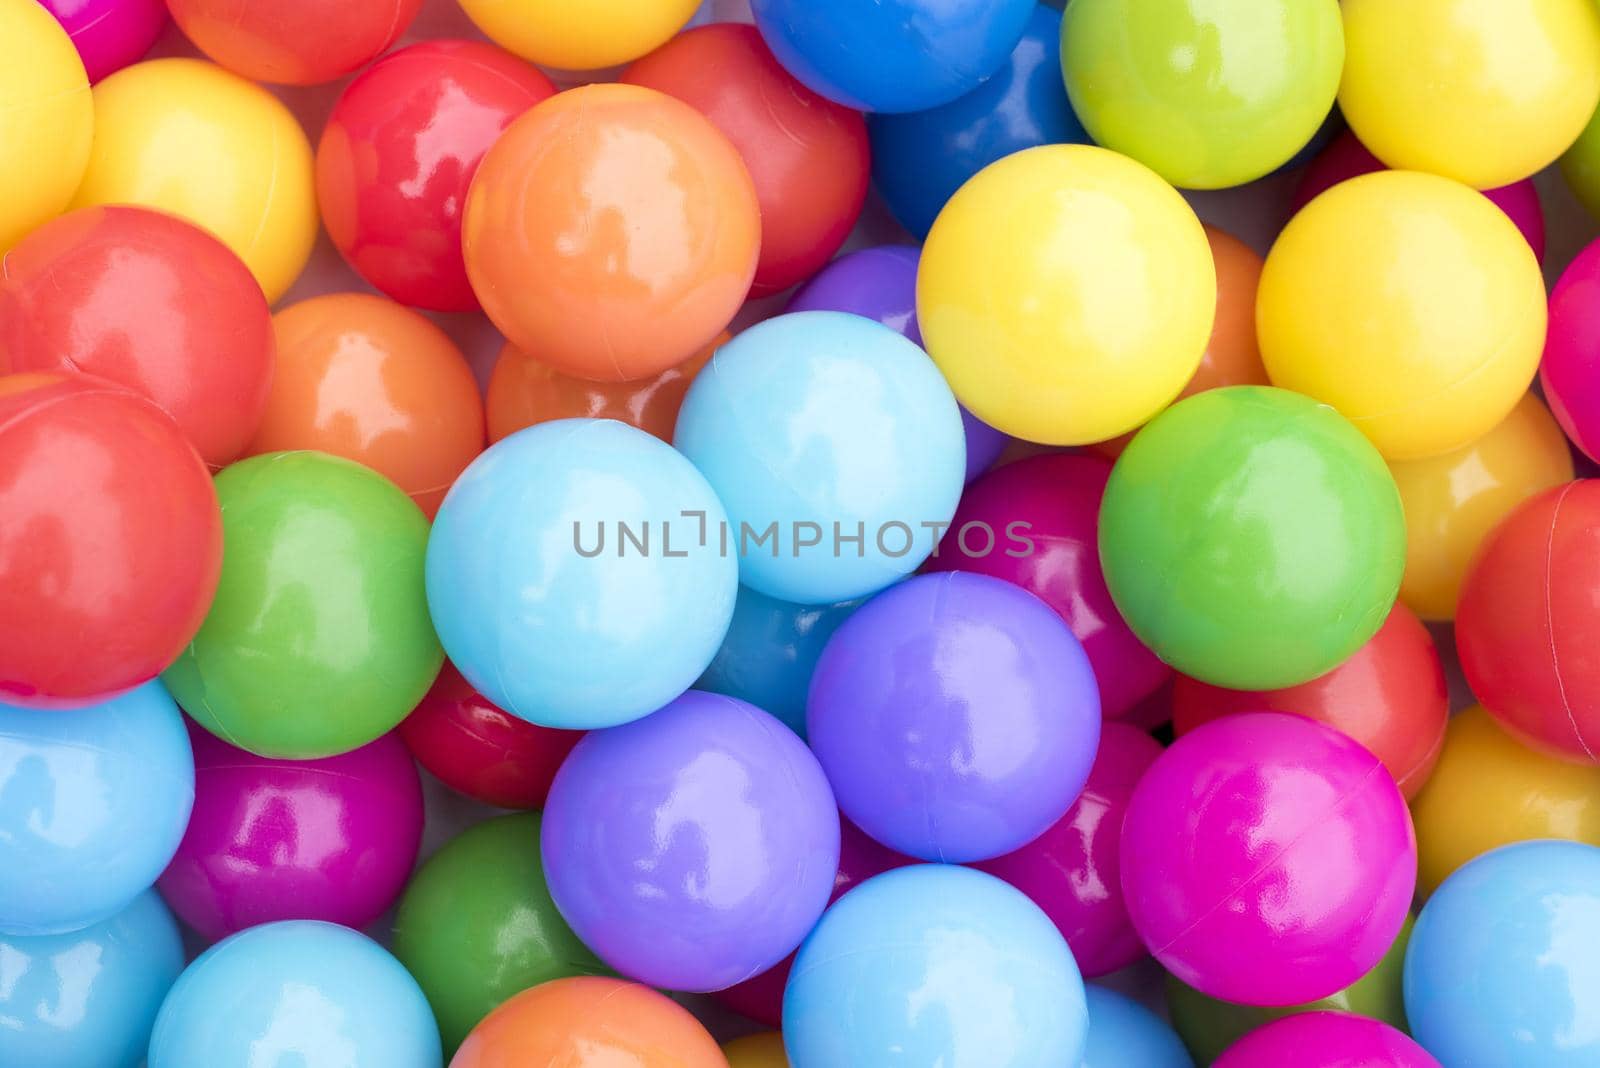 Background of a heap of colorful balls in rainbow colors in a full frame view from above